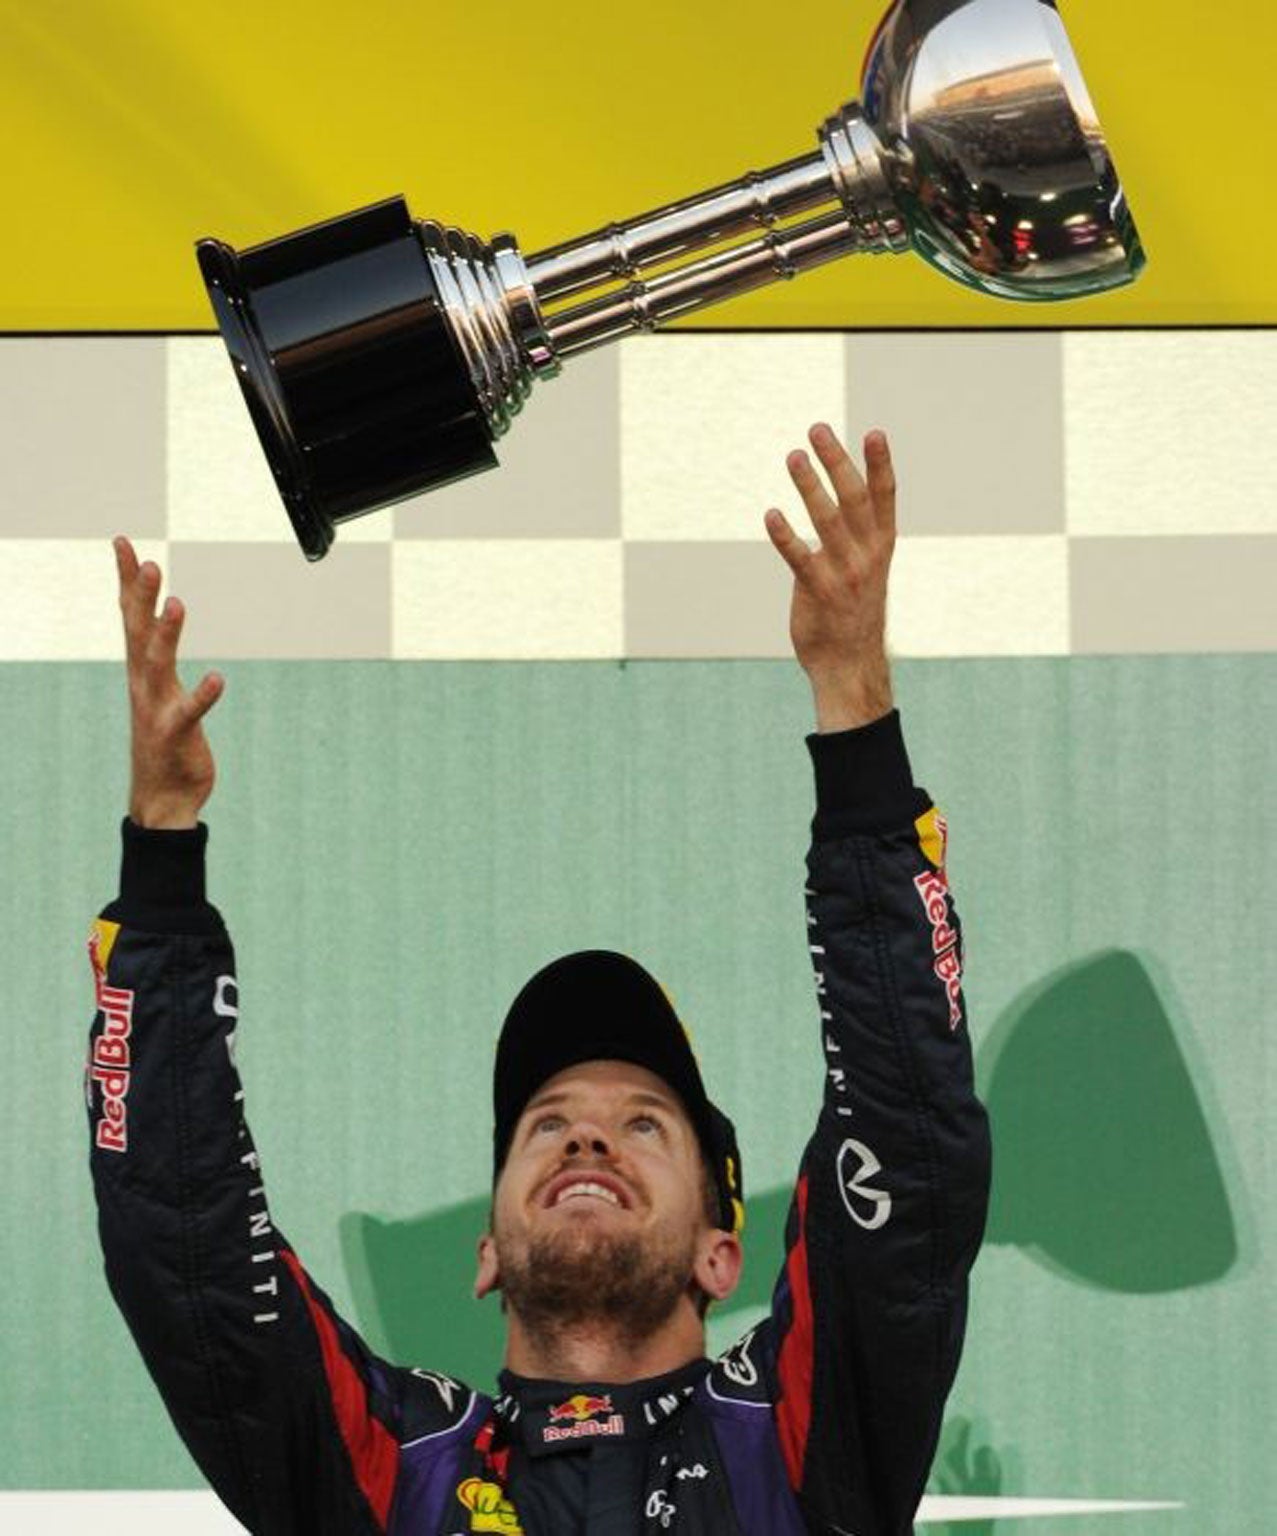 Vettel made a two-stop strategy work to perfection around Suzuka to claim his fourth Japanese Grand Prix win in five years, spearheading a Red Bull one-two as Mark Webber claimed second just ahead of Romain Grosjean in his Lotus